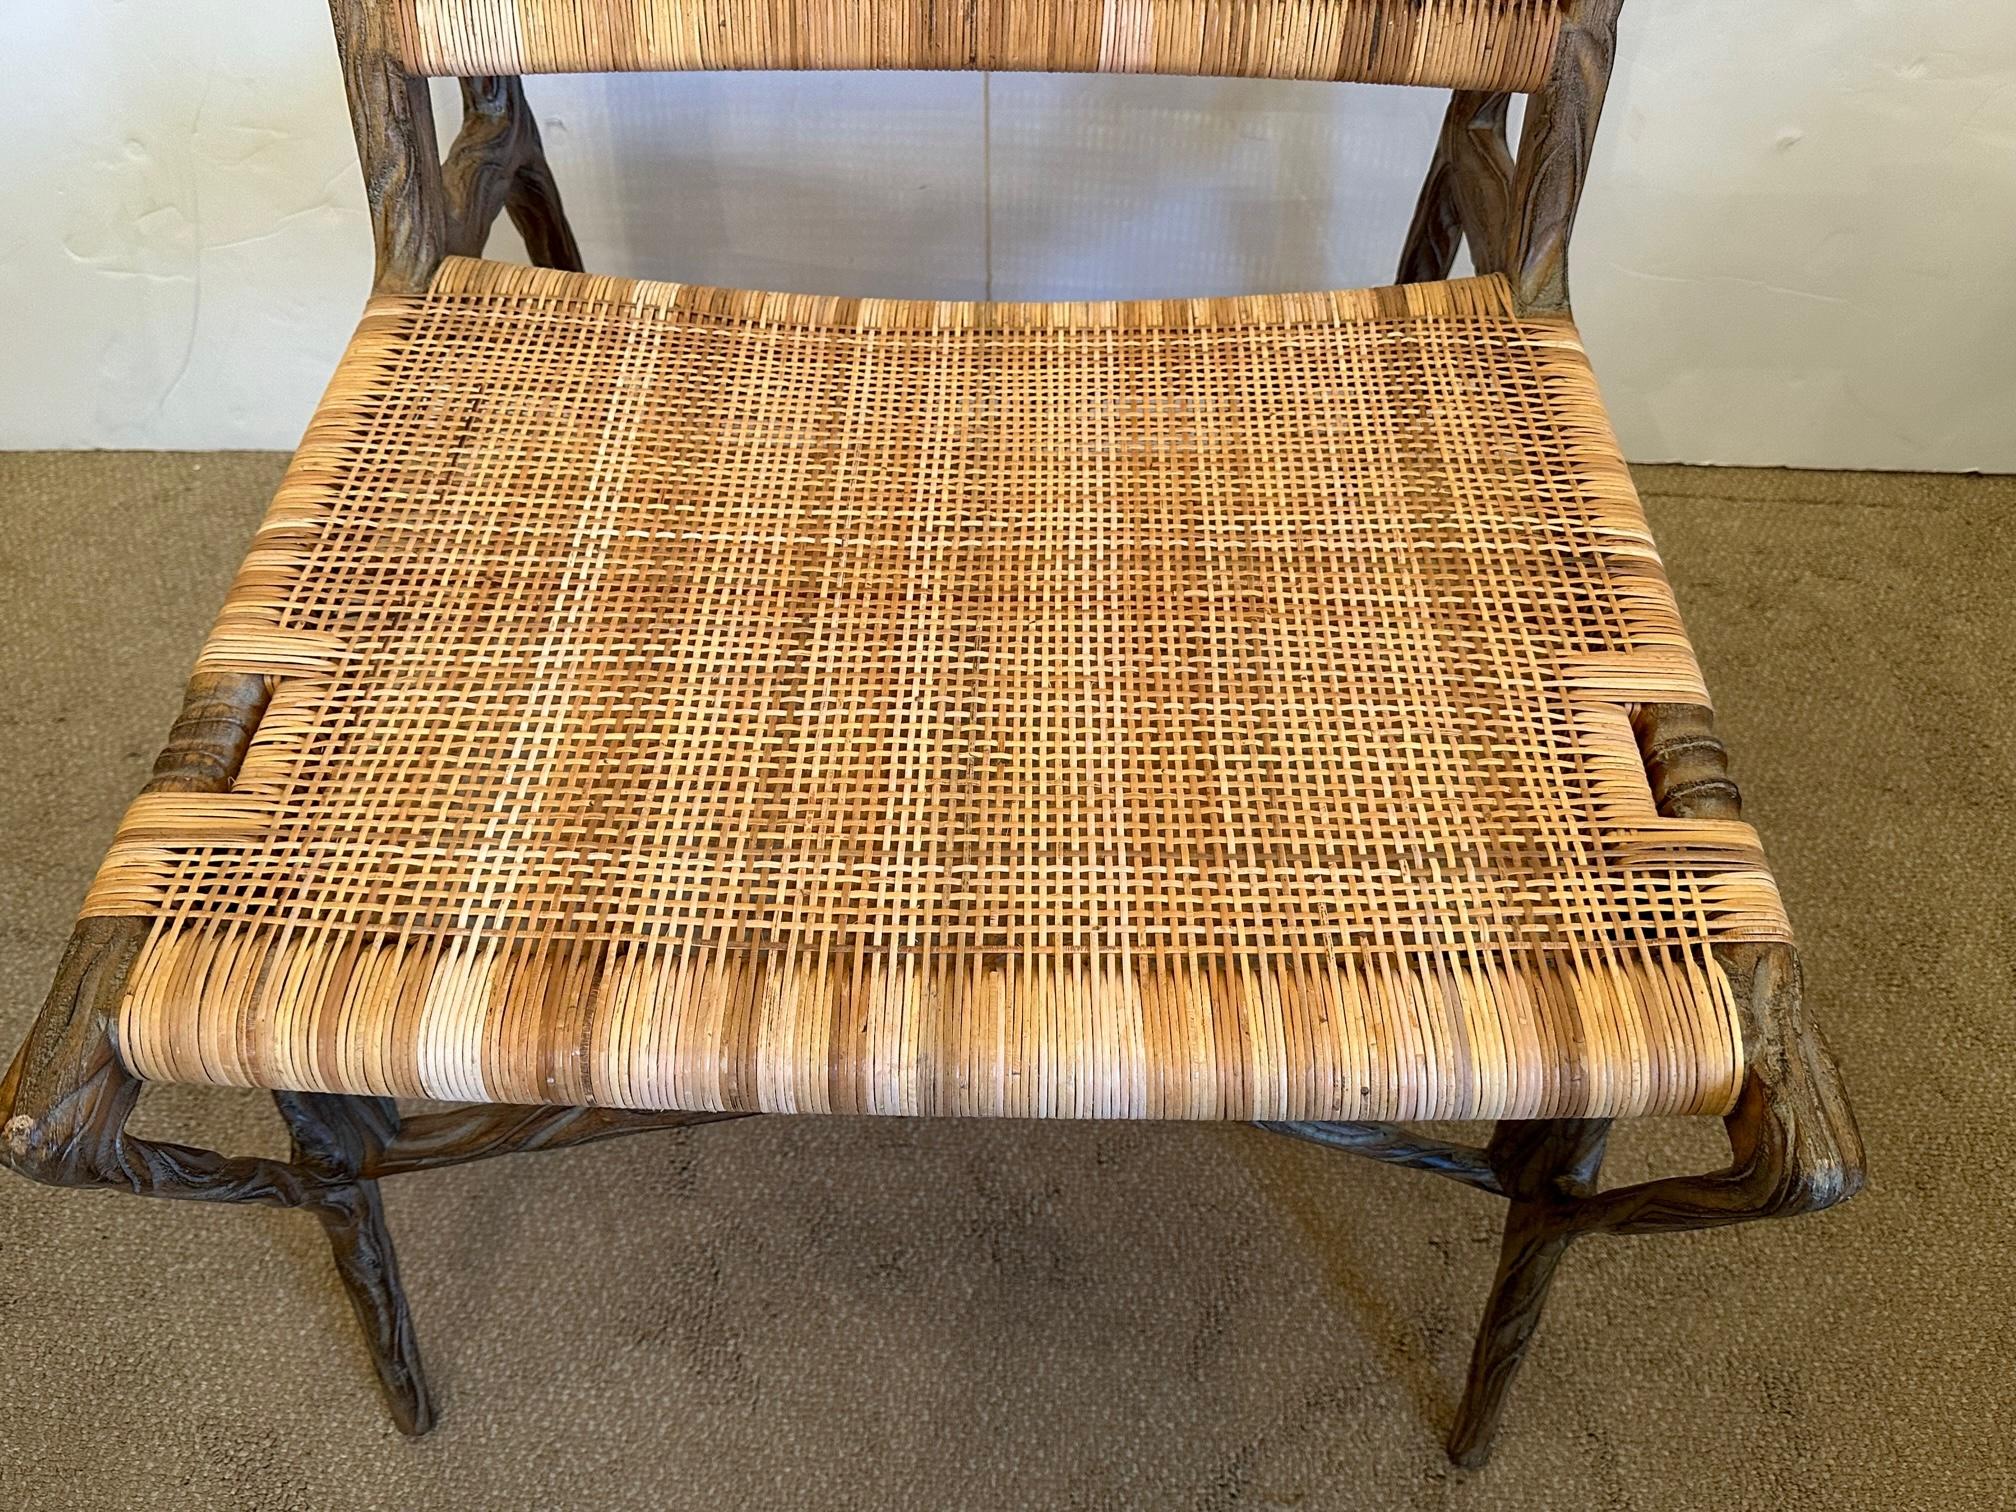 Contemporary Superb Organic Modern Faux Twig and Woven Rattan Chair